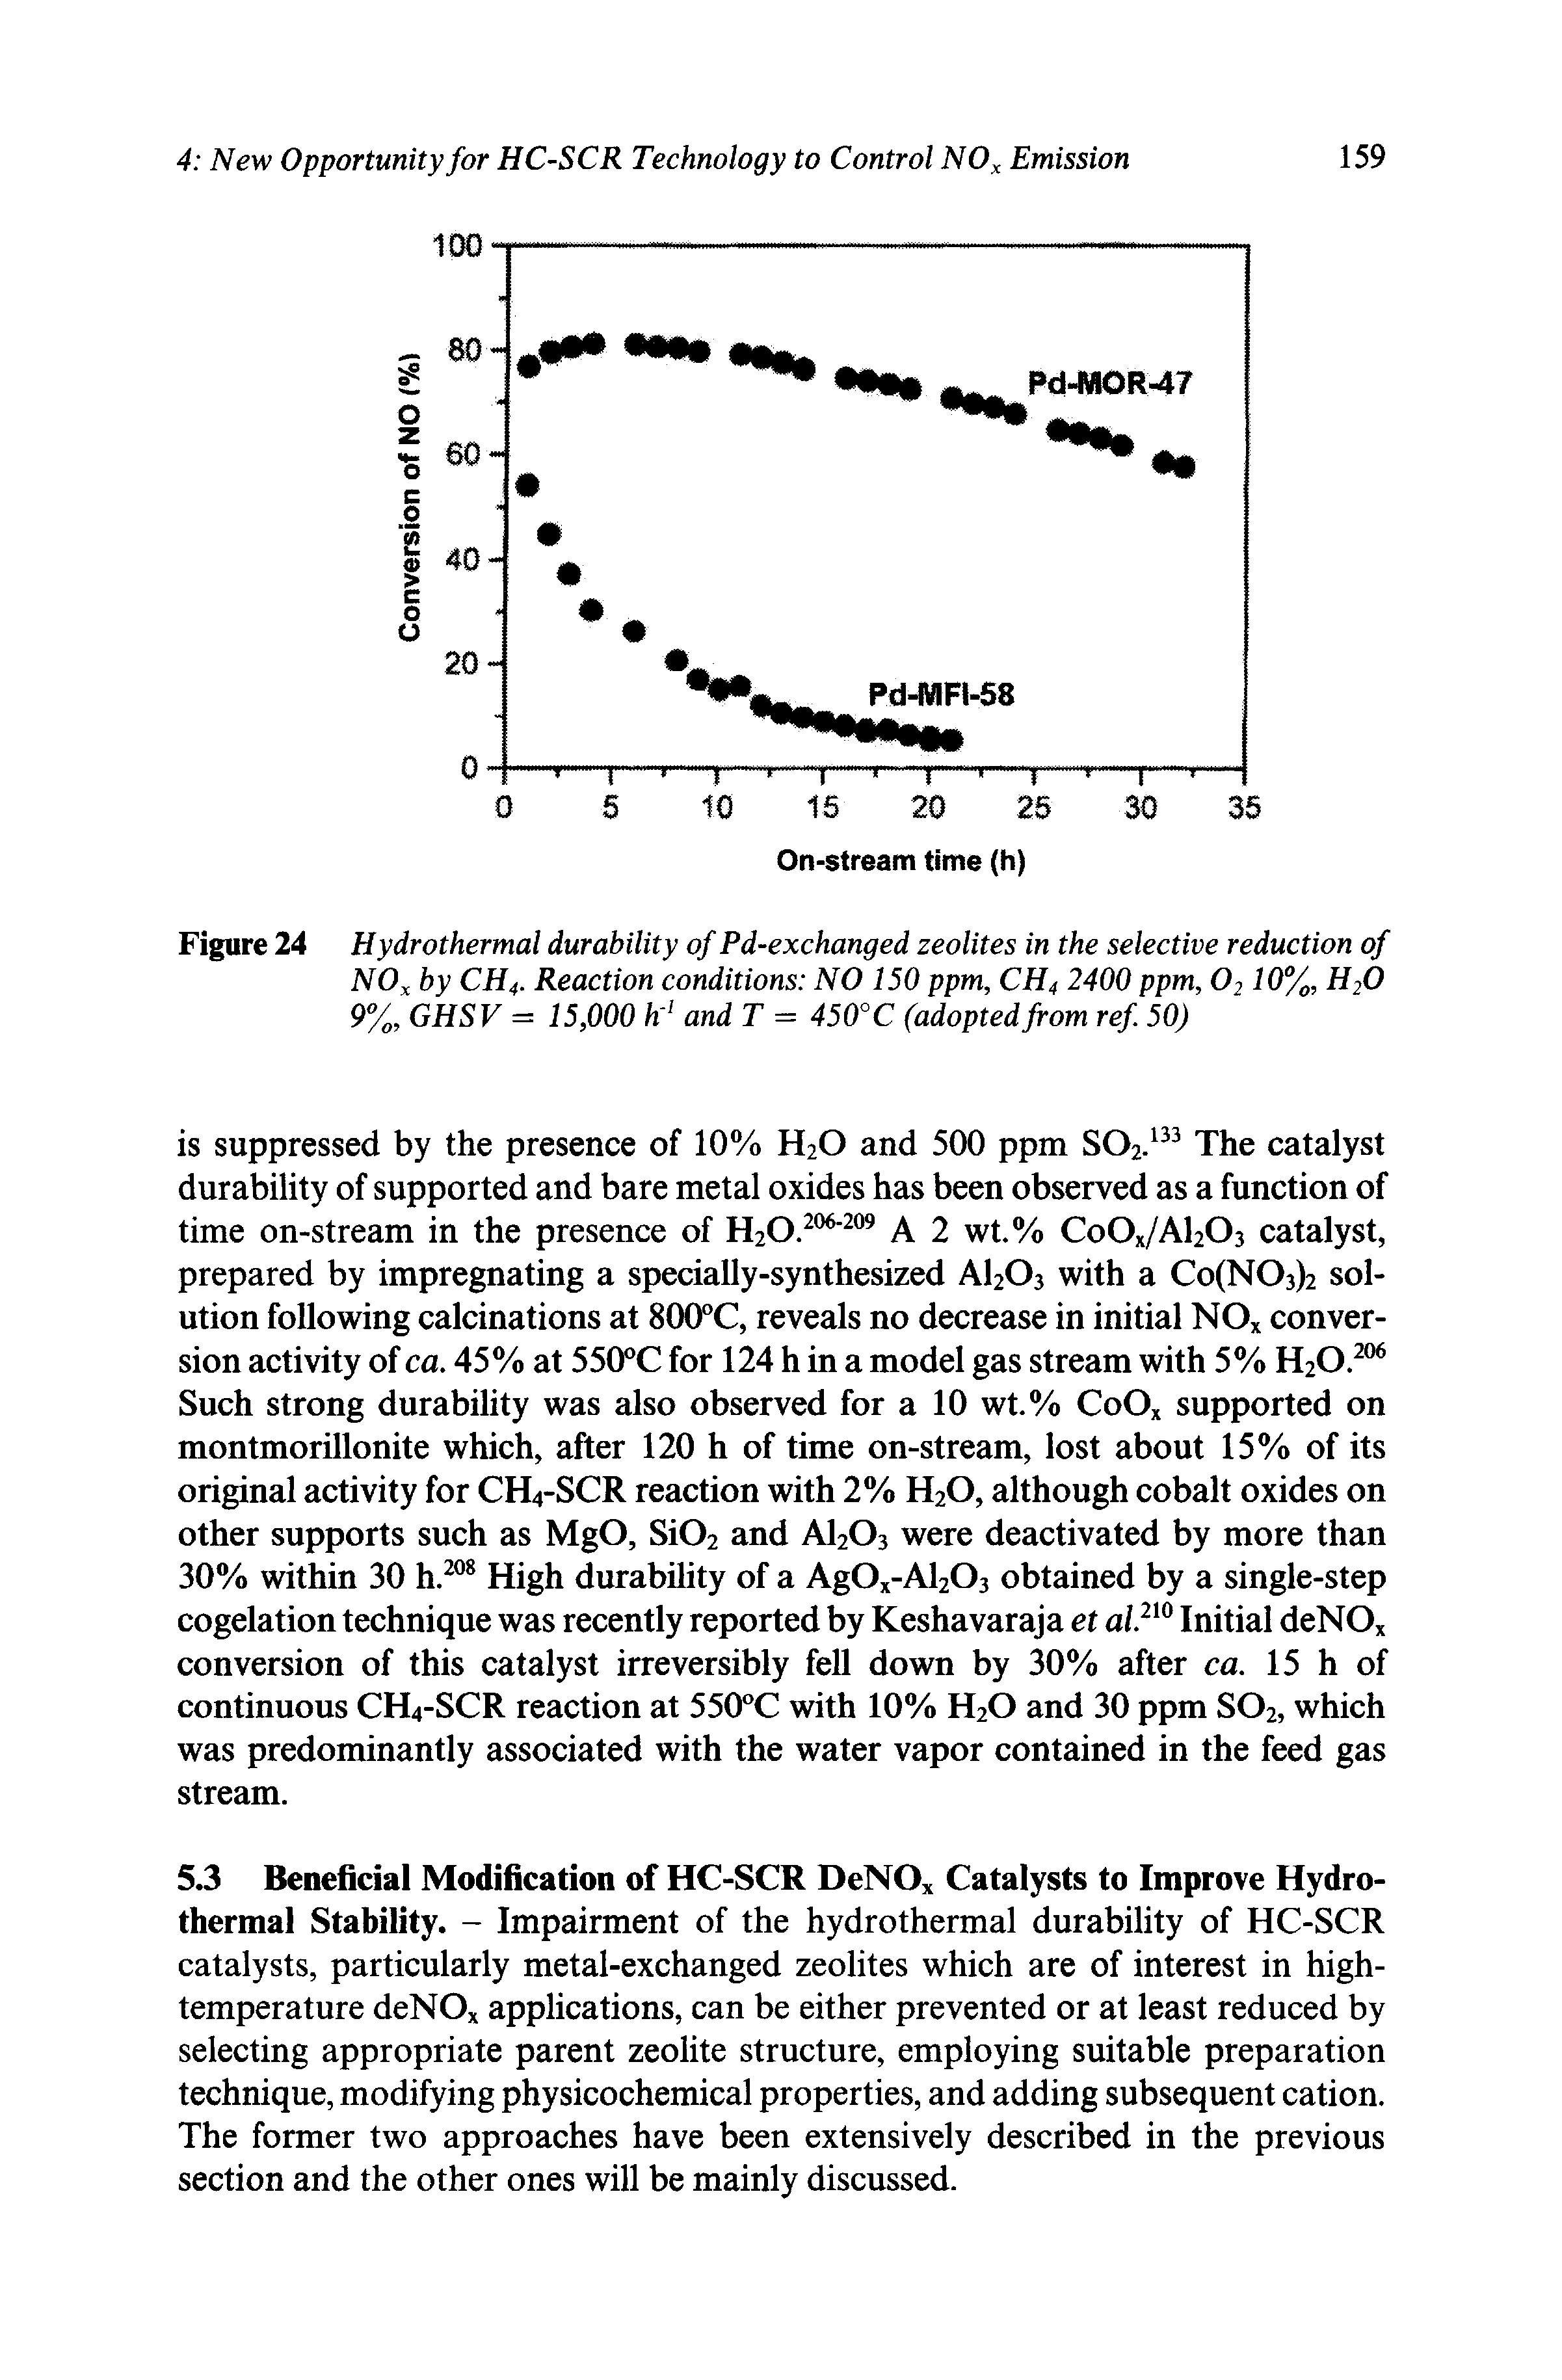 Figure 24 Hydrothermal durability of Pd-exchanged zeolites in the selective reduction of NO by CH4. Reaction conditions NO 150 ppm, CH4 2400 ppm, O210%, H2O 9%, GHSV = 15,000 h- and T = 450°C (adopted from ref 50)...